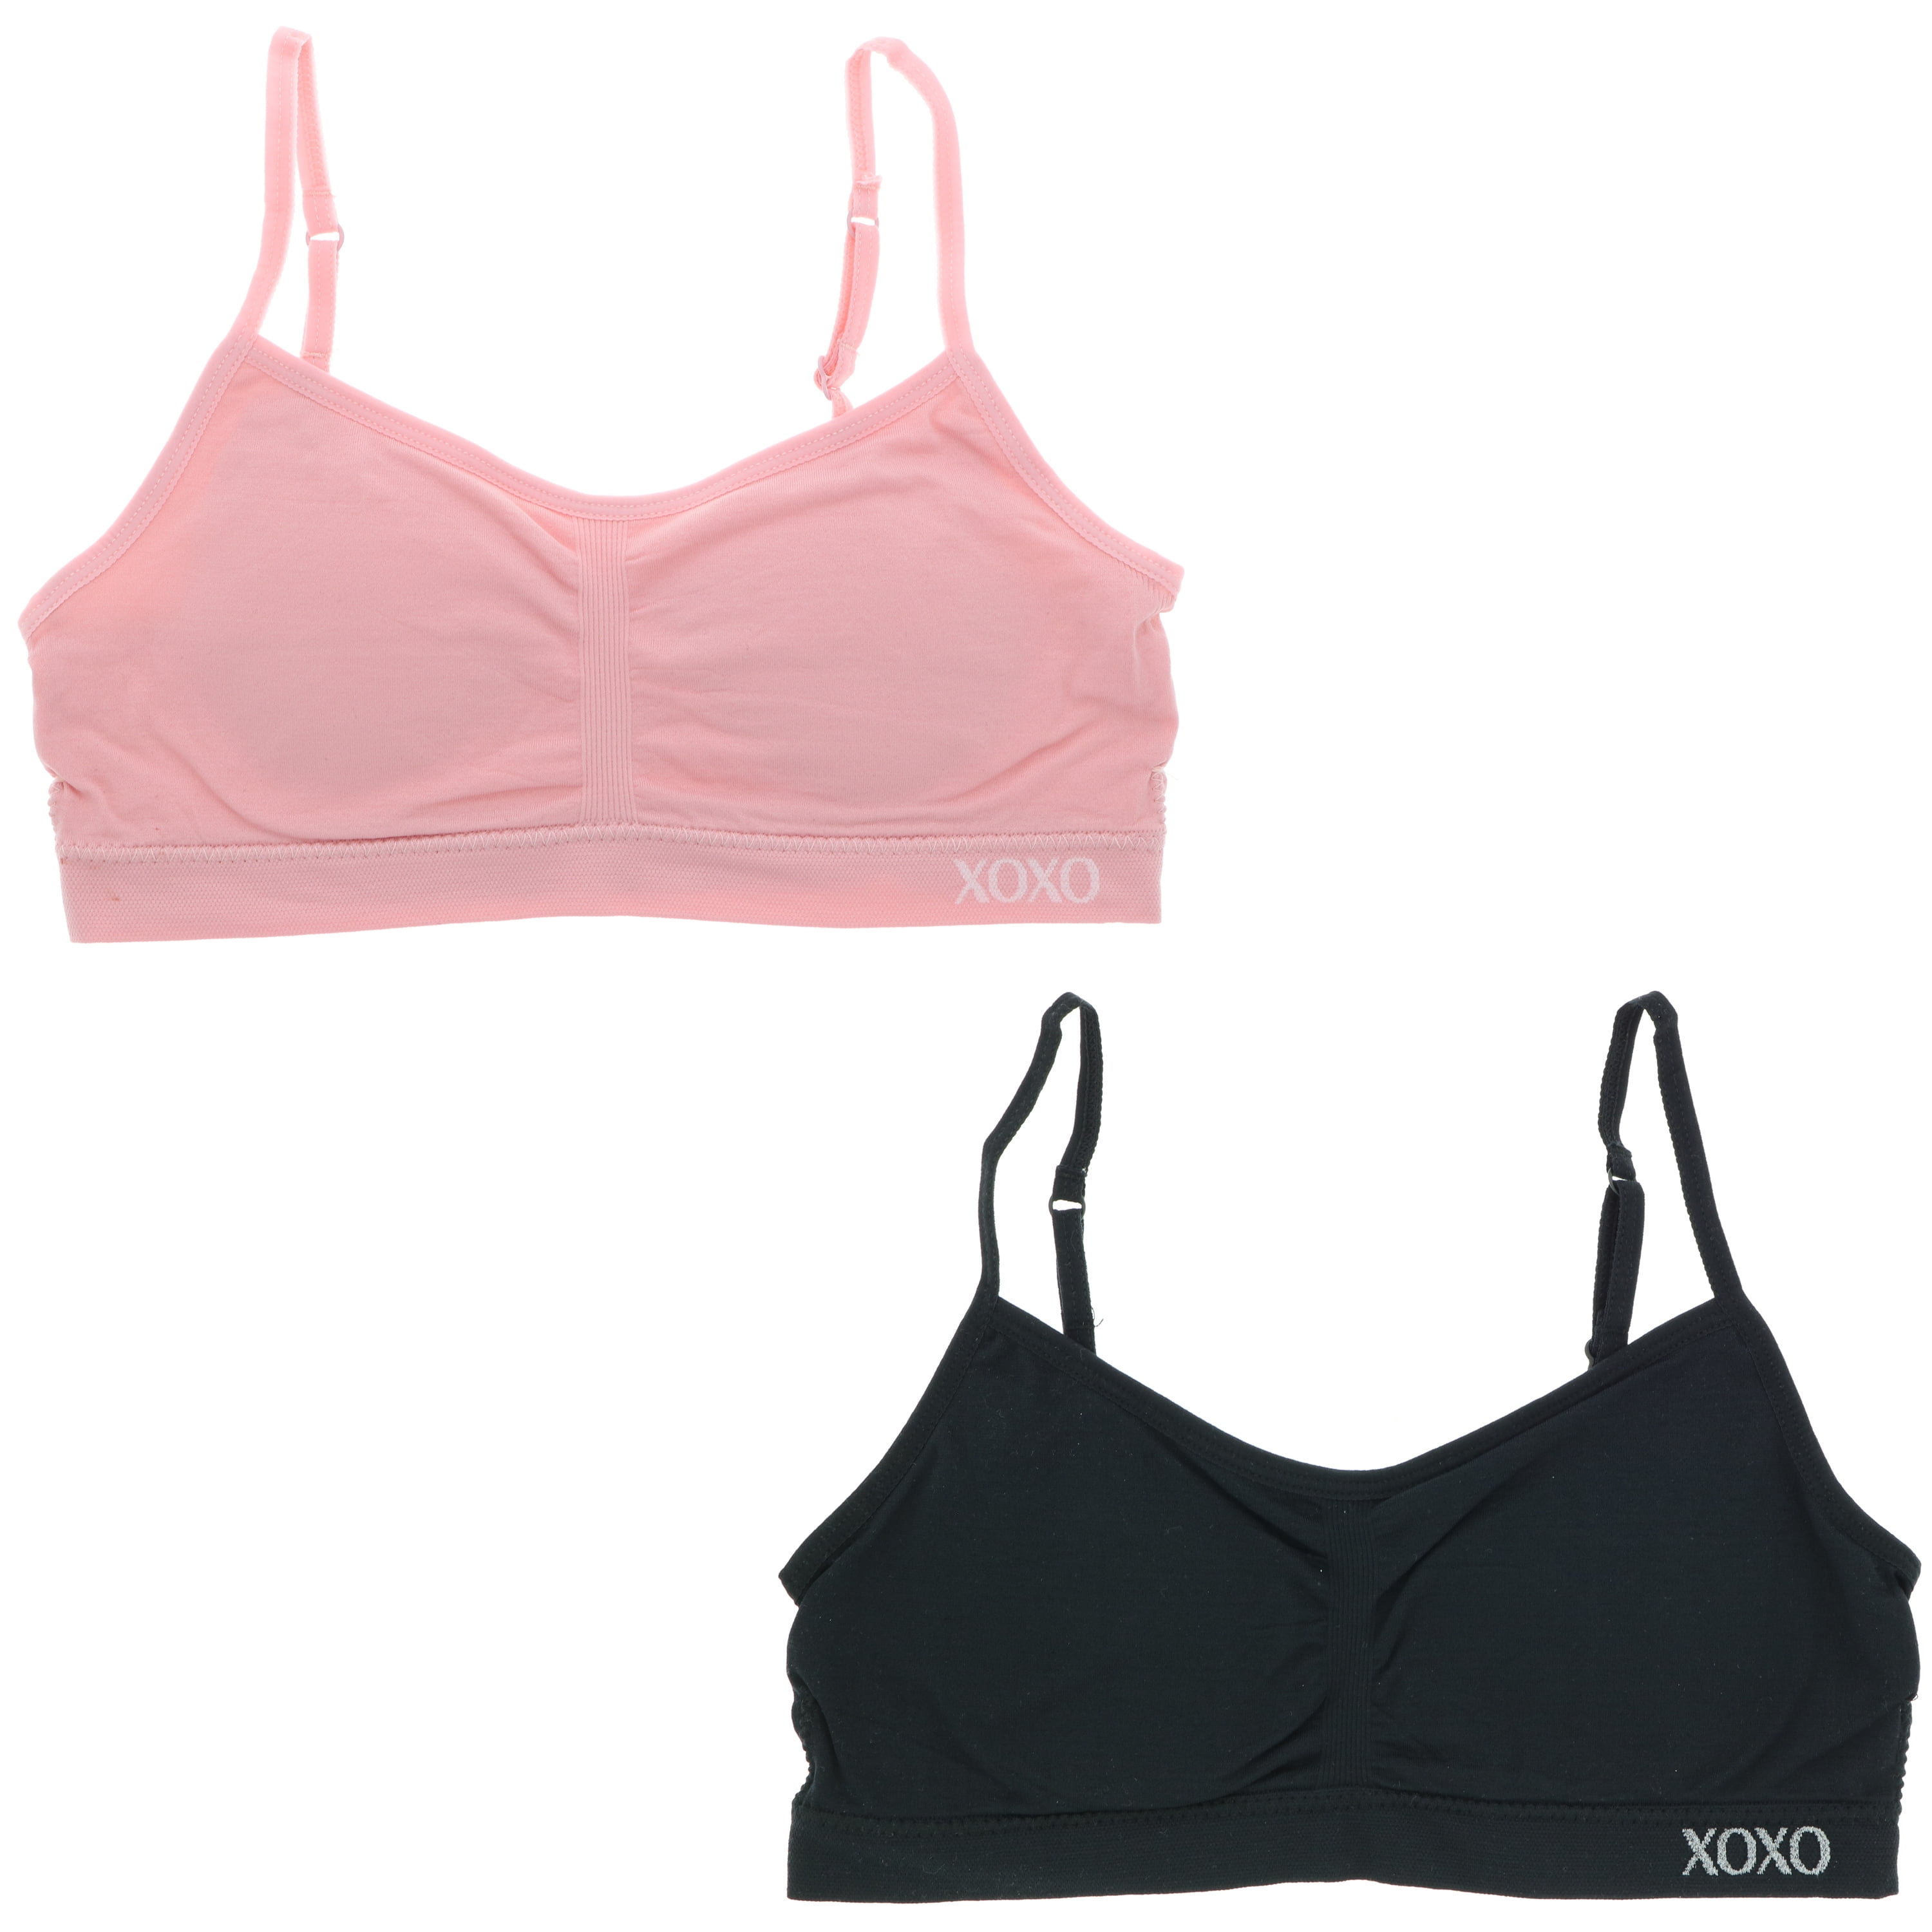 XOXO Girl's Lightly Lined Training Bra 2 Pack - Black & Pink - Small 30 